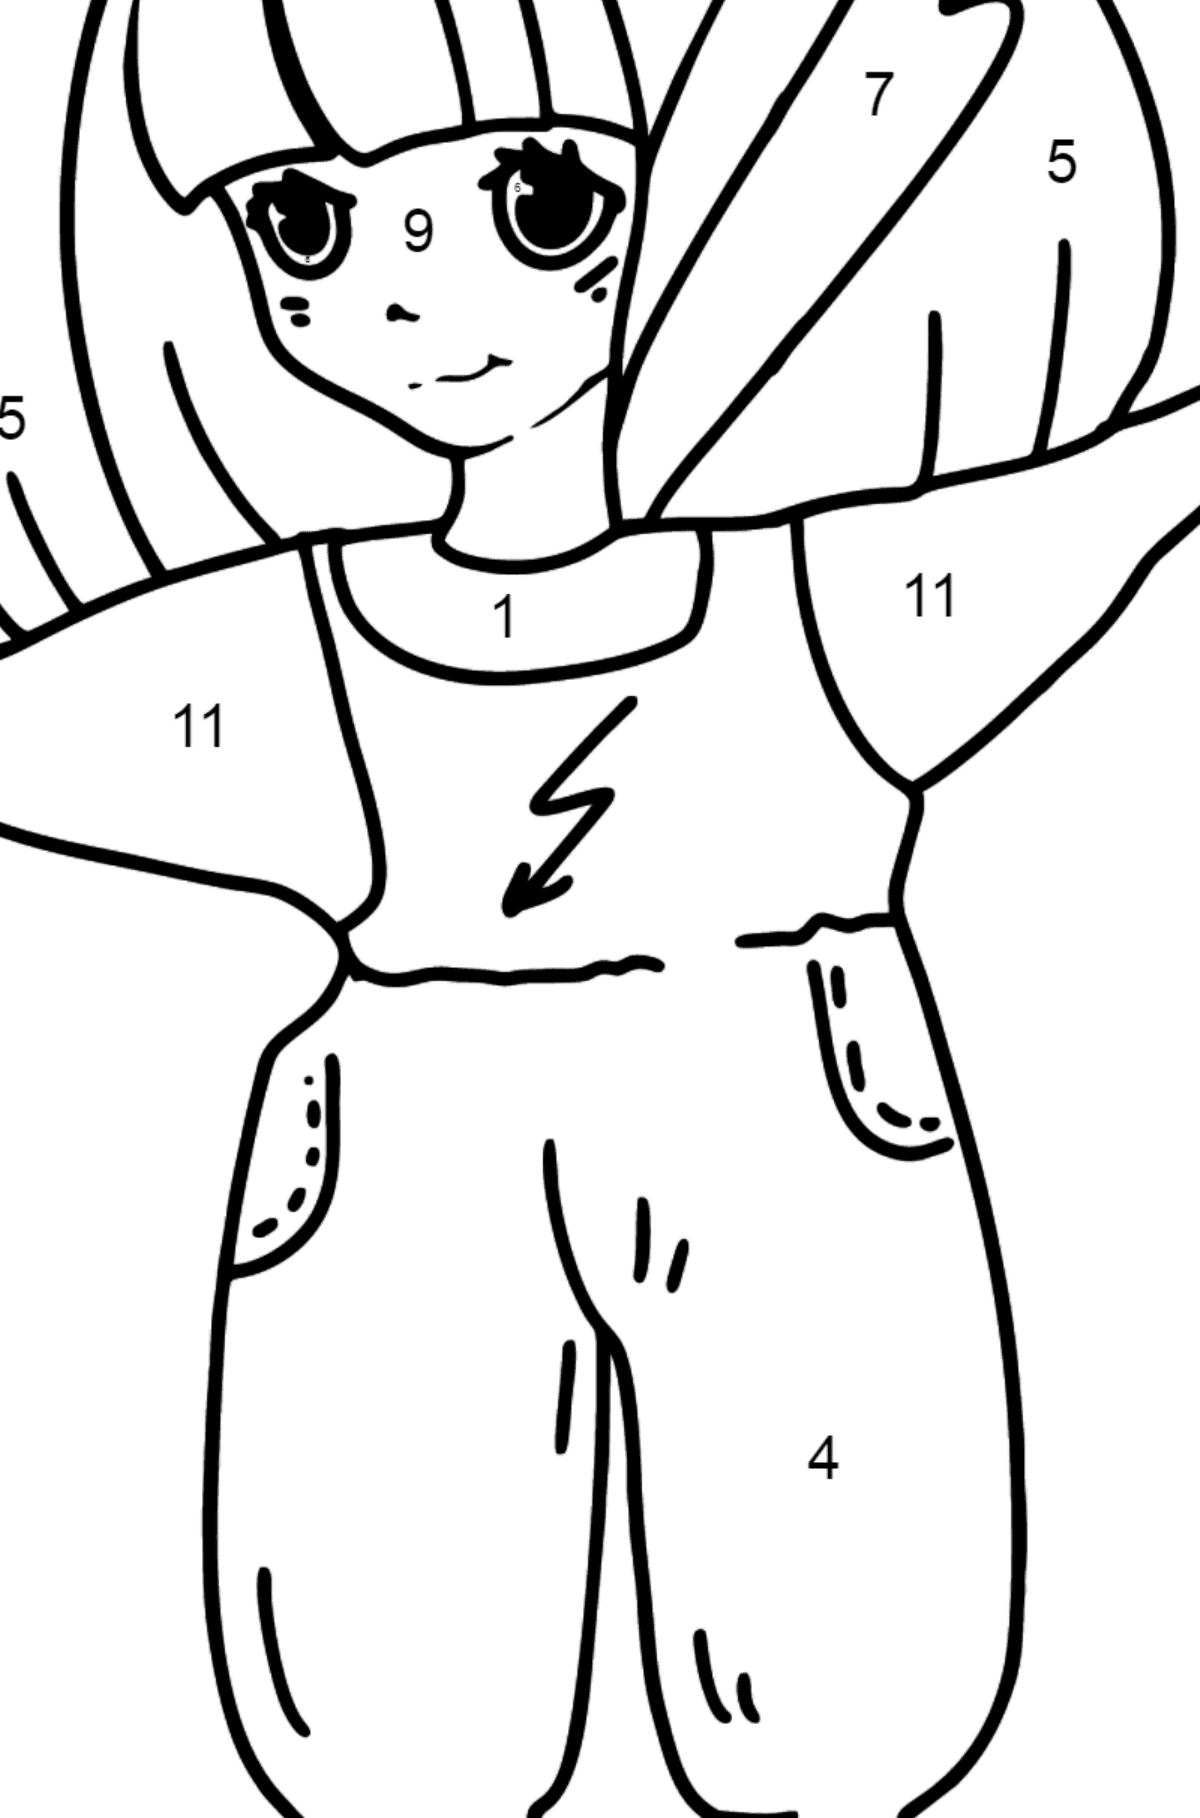 Thunder Anime Girl Coloring Pages - Coloring by Numbers for Kids